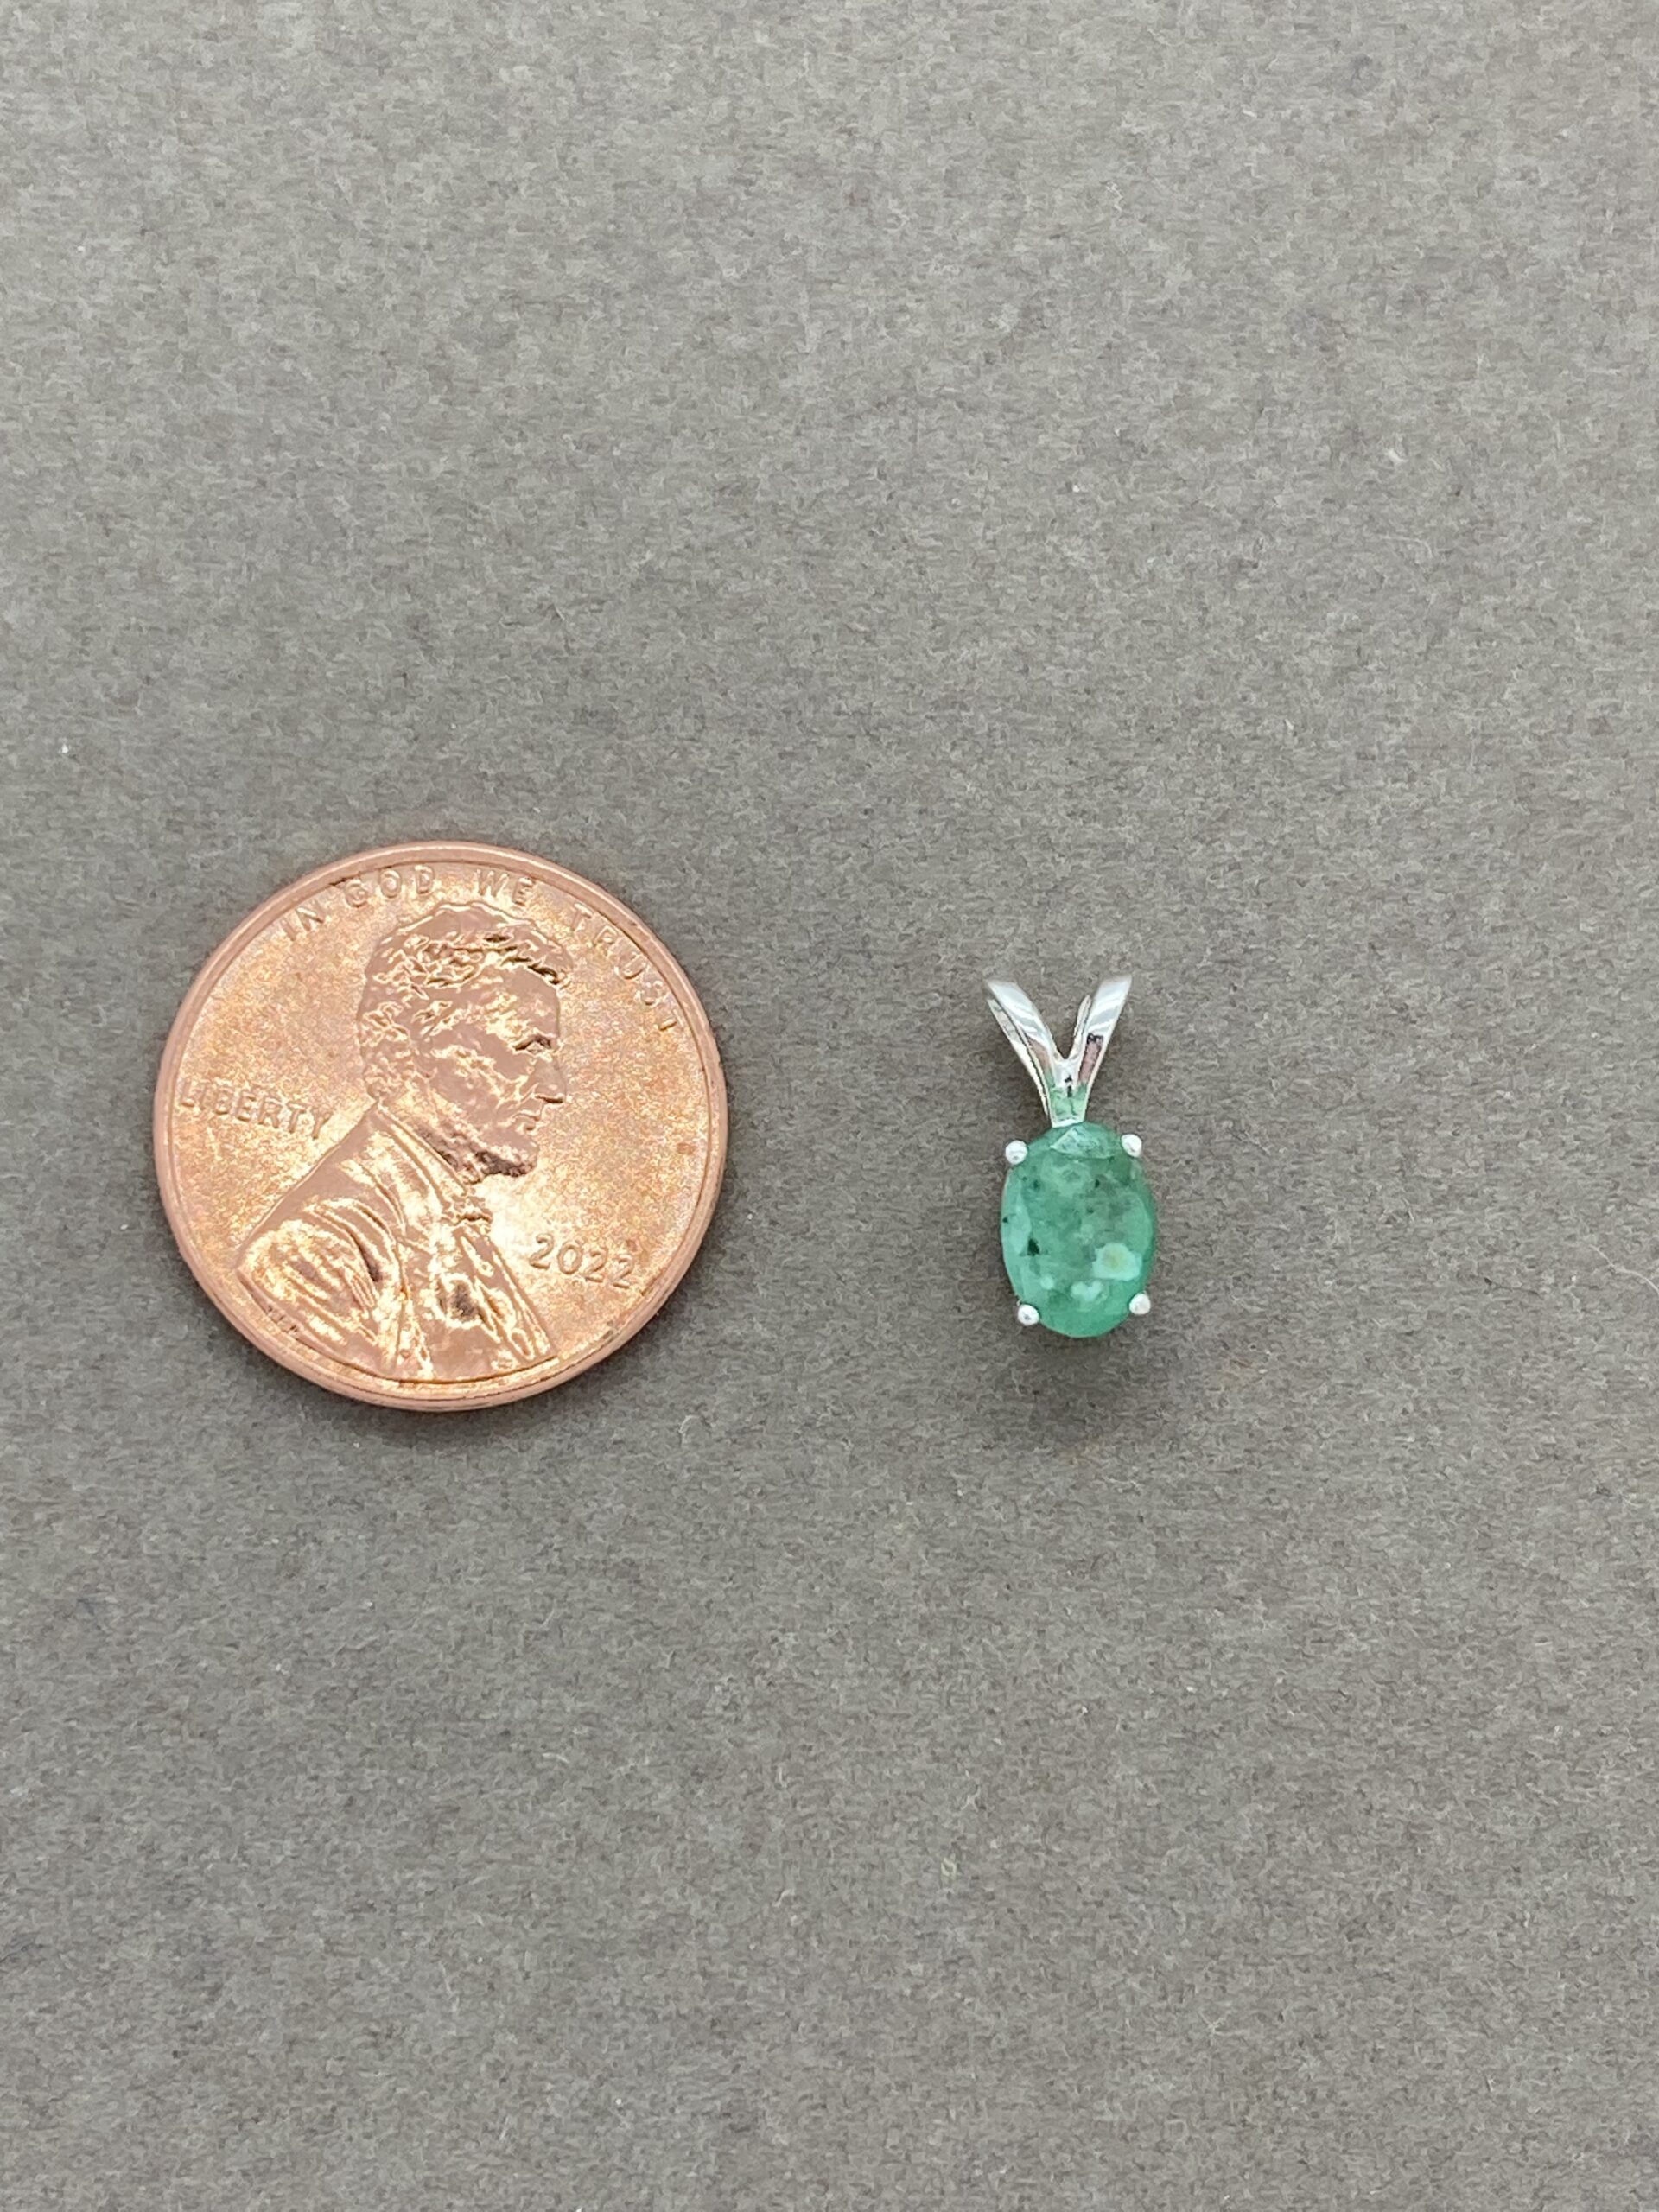 Emerald pendant with penny